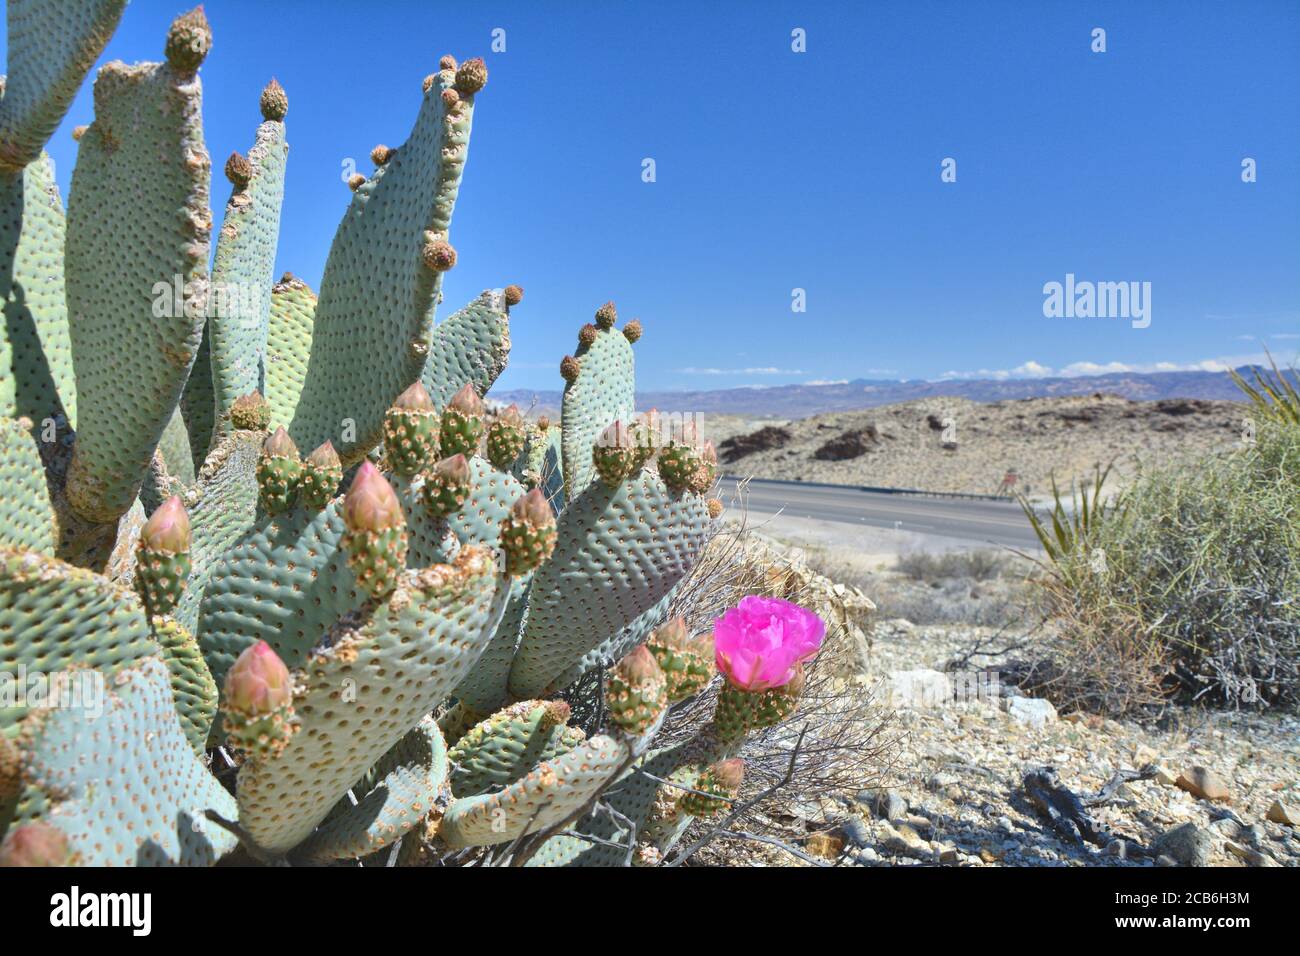 Opuntia basilaris known as beavertail cactus or beavertail prickly pear blomming by pink flowers at Mojave dessert. USA natural landscape. Stock Photo